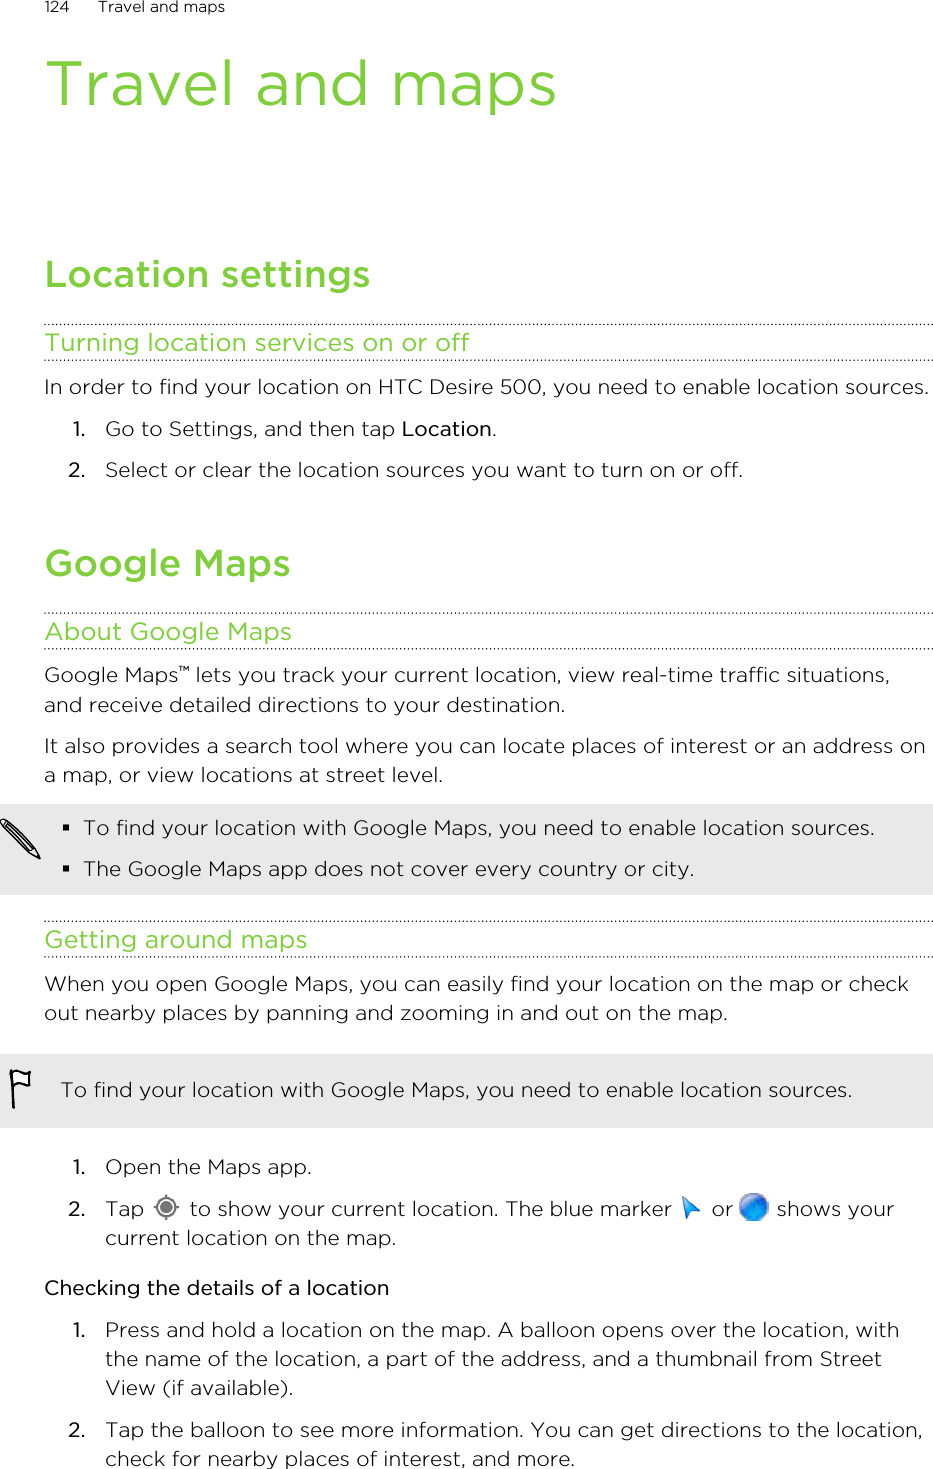 Travel and mapsLocation settingsTurning location services on or offIn order to find your location on HTC Desire 500, you need to enable location sources.1. Go to Settings, and then tap Location.2. Select or clear the location sources you want to turn on or off.Google MapsAbout Google MapsGoogle Maps™ lets you track your current location, view real-time traffic situations,and receive detailed directions to your destination.It also provides a search tool where you can locate places of interest or an address ona map, or view locations at street level.§To find your location with Google Maps, you need to enable location sources.§The Google Maps app does not cover every country or city.Getting around mapsWhen you open Google Maps, you can easily find your location on the map or checkout nearby places by panning and zooming in and out on the map.To find your location with Google Maps, you need to enable location sources.1. Open the Maps app.2. Tap   to show your current location. The blue marker   or   shows yourcurrent location on the map.Checking the details of a location1. Press and hold a location on the map. A balloon opens over the location, withthe name of the location, a part of the address, and a thumbnail from StreetView (if available).2. Tap the balloon to see more information. You can get directions to the location,check for nearby places of interest, and more.124 Travel and maps